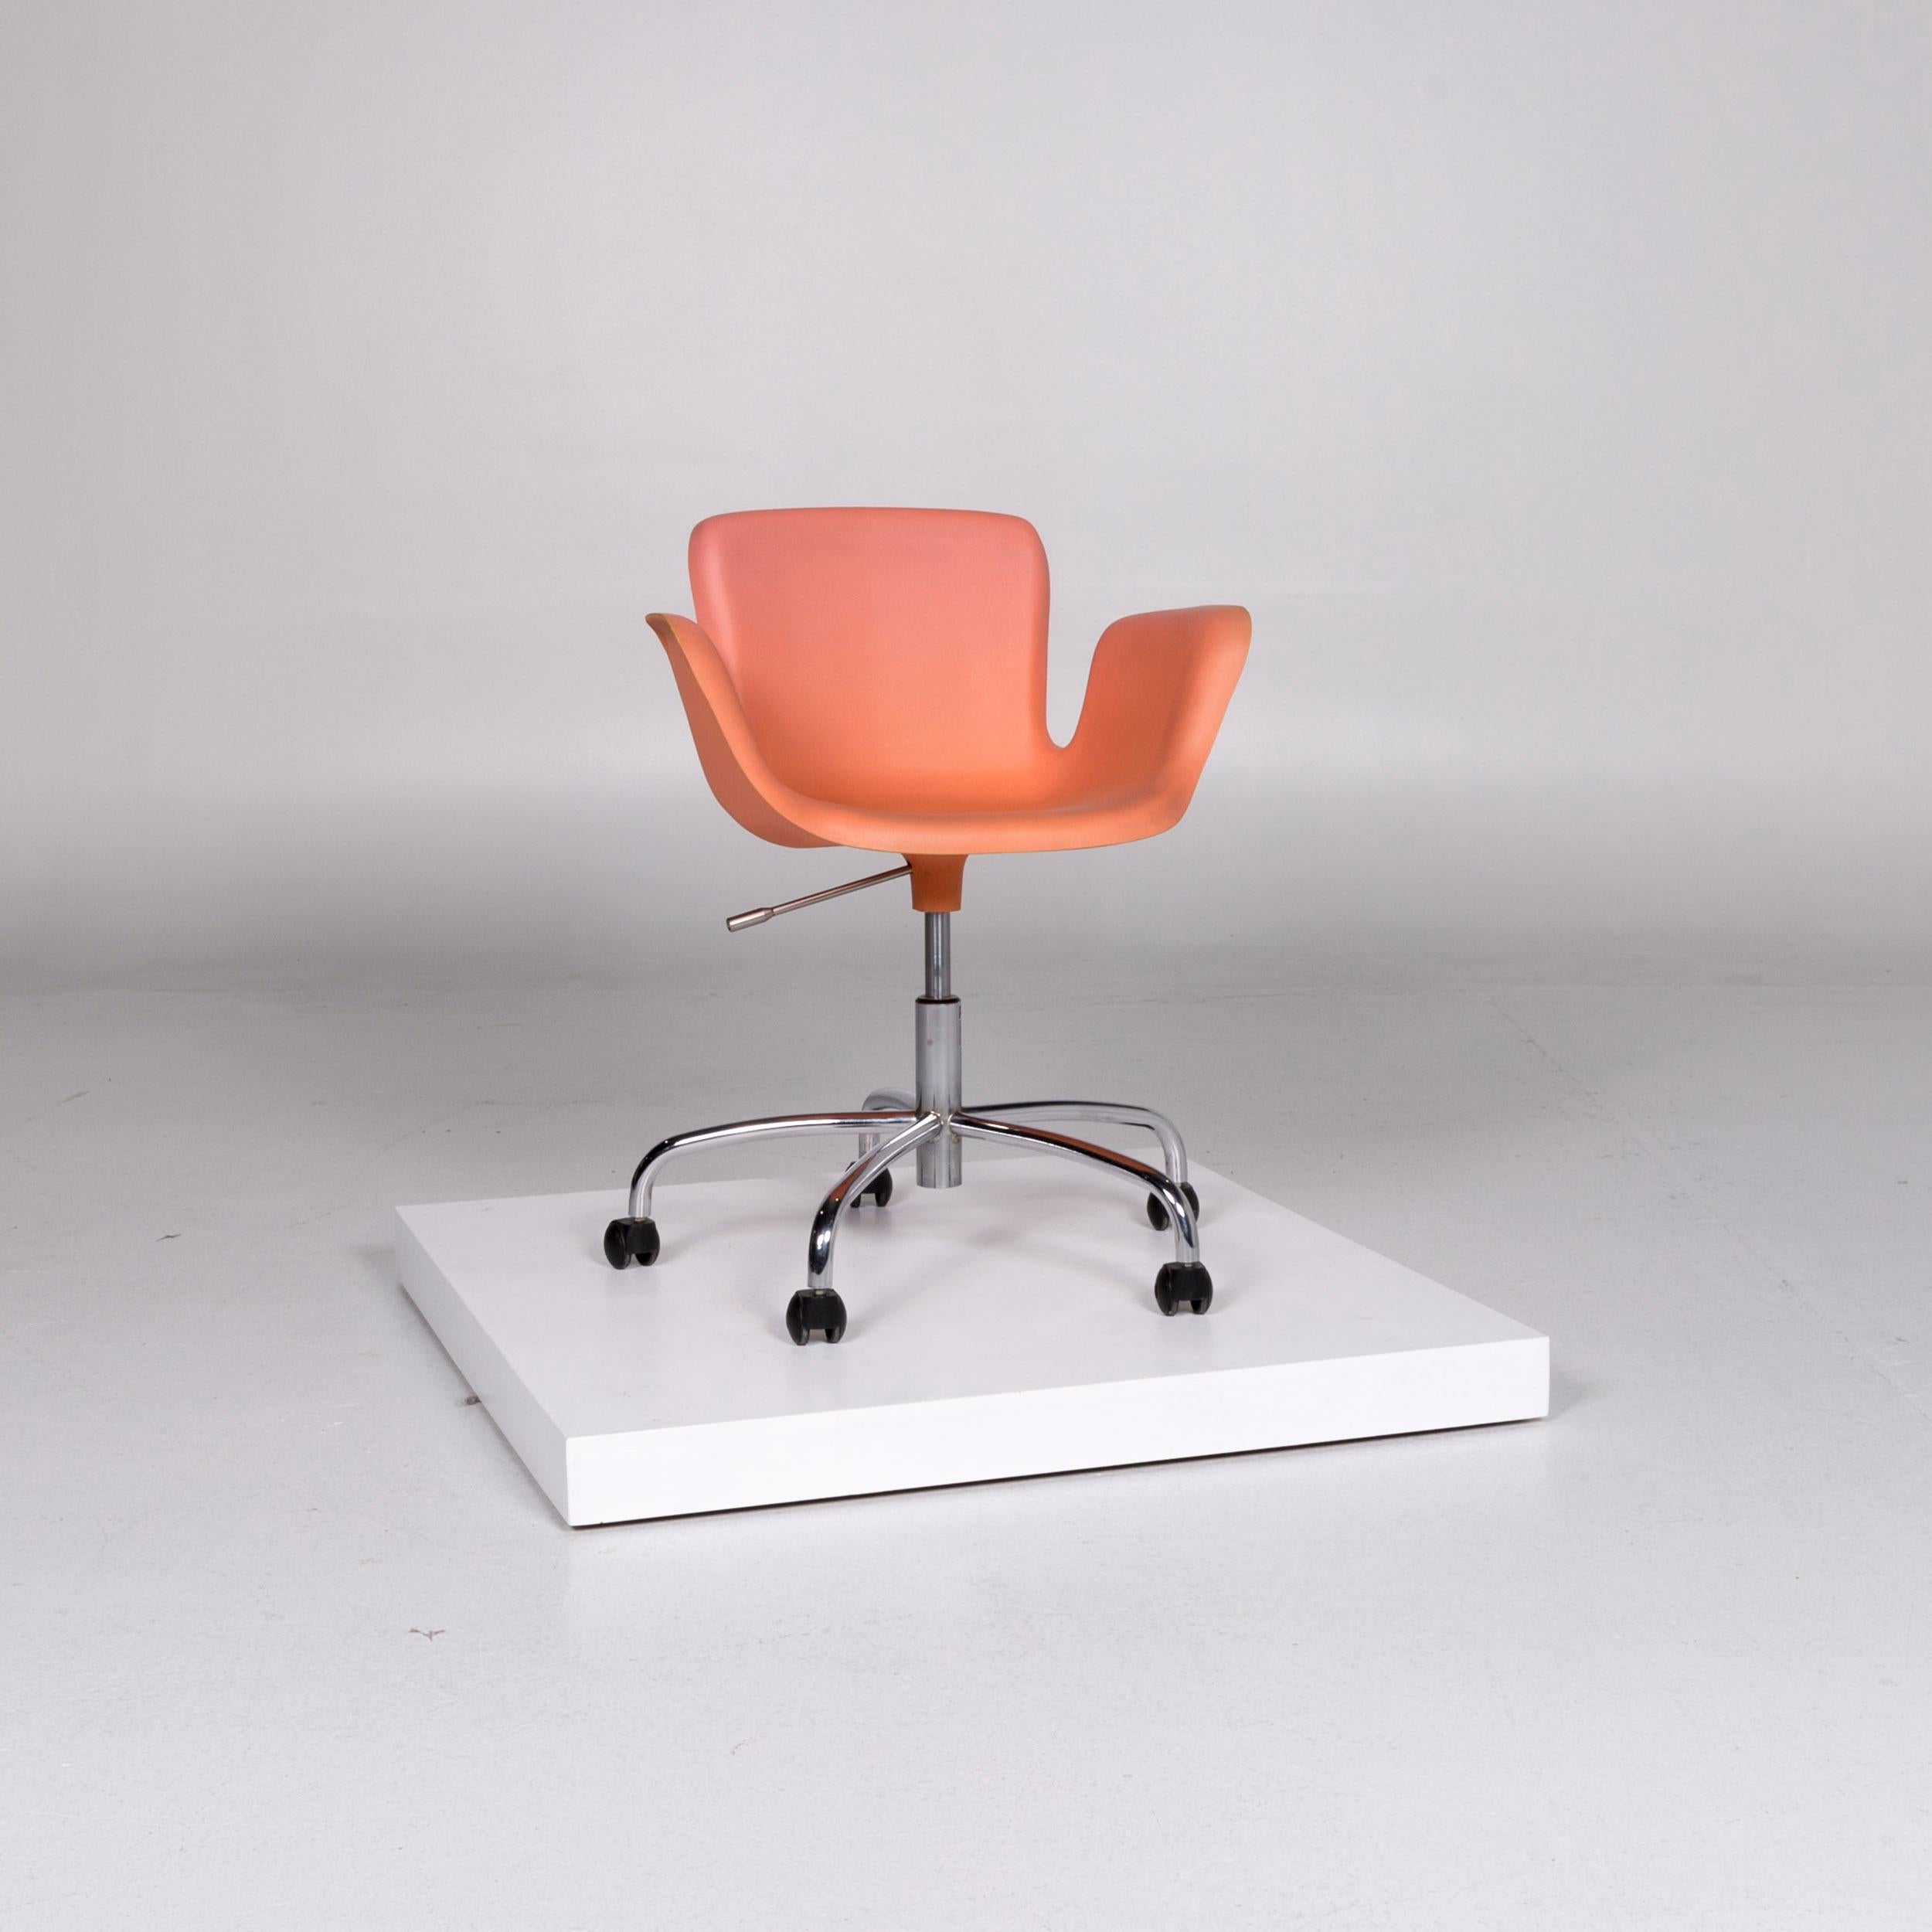 We bring to you a Cappellini plastic armchair orange apricot chair polypropylene.
    
 
 Product measurements in centimeters:
 
 Depth 60
Width 66
Height 74
Seat-height 45
Rest-height 64
Seat-depth 44
Seat-width 46
Back-height 33.